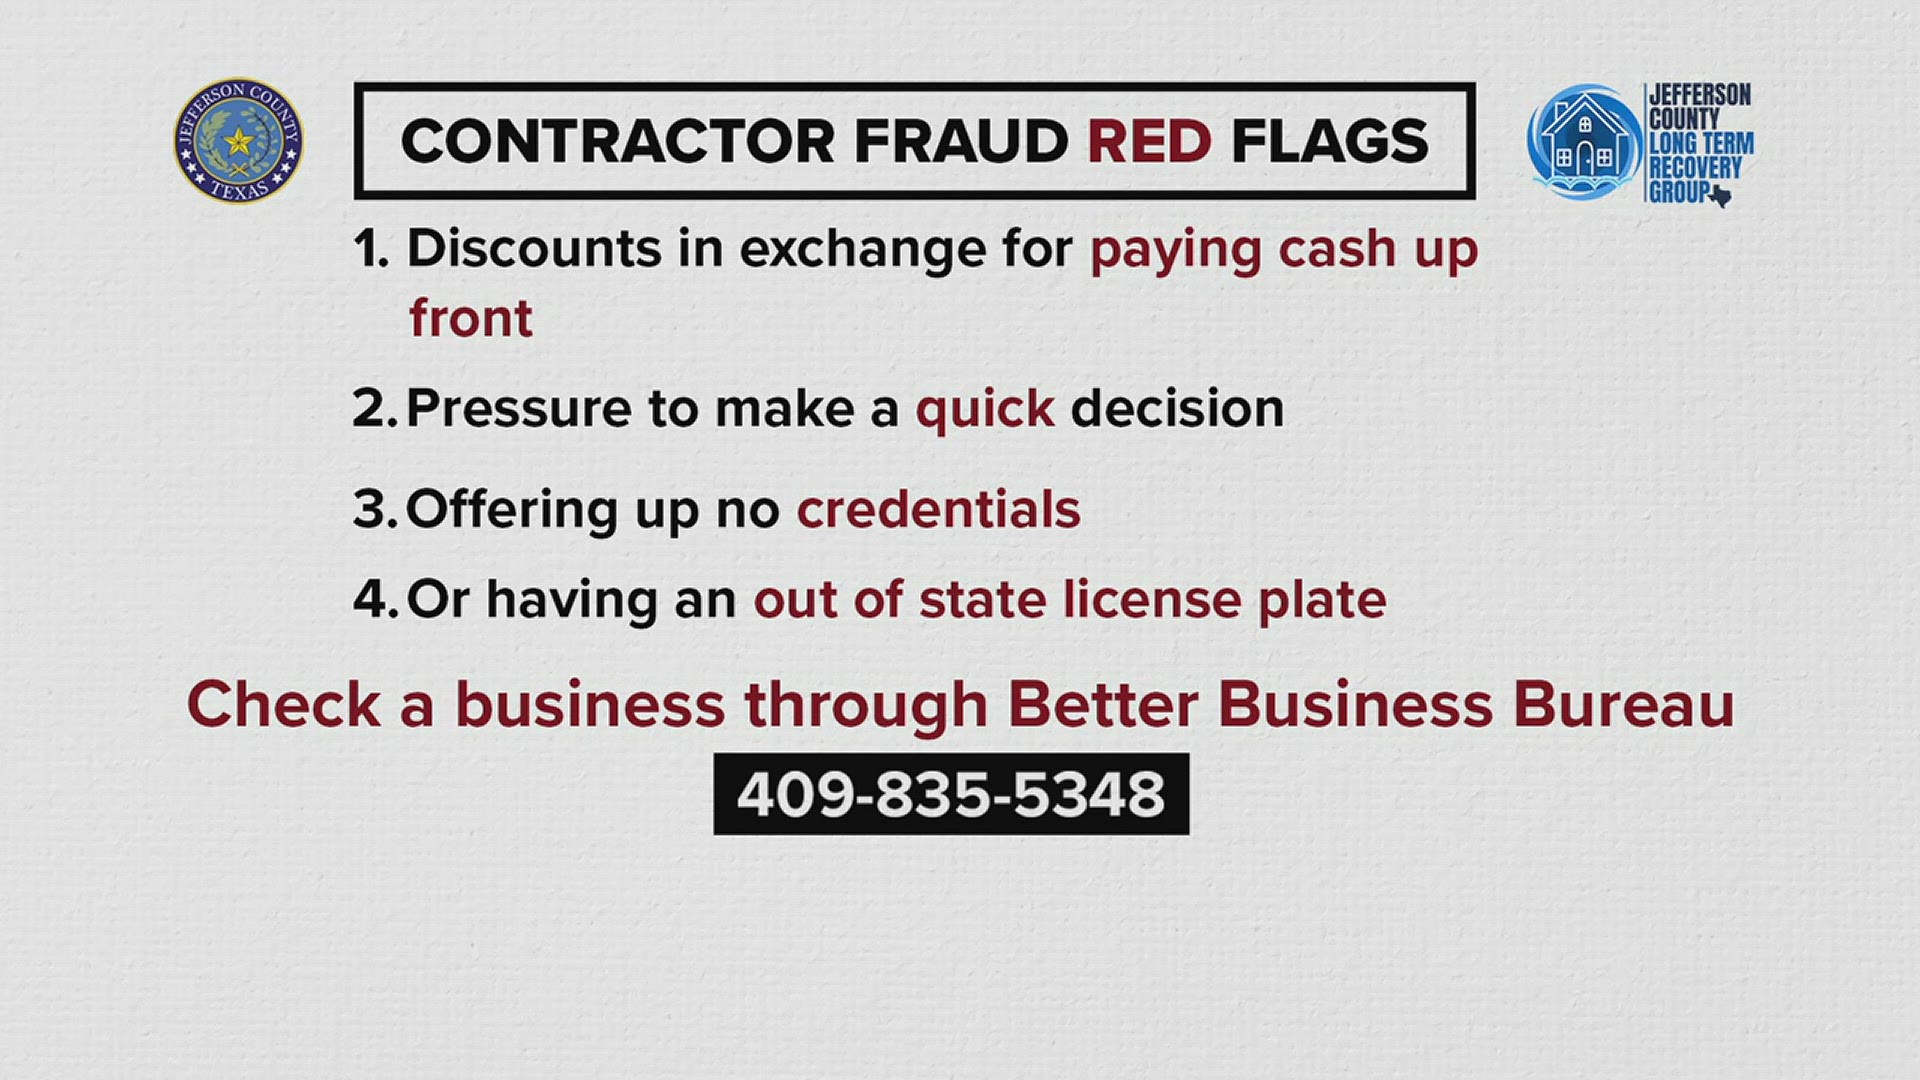 If you need to report any contractor scams, or need to file a complaint about an illegitimate business, reach out to your local Better Business Bureau.